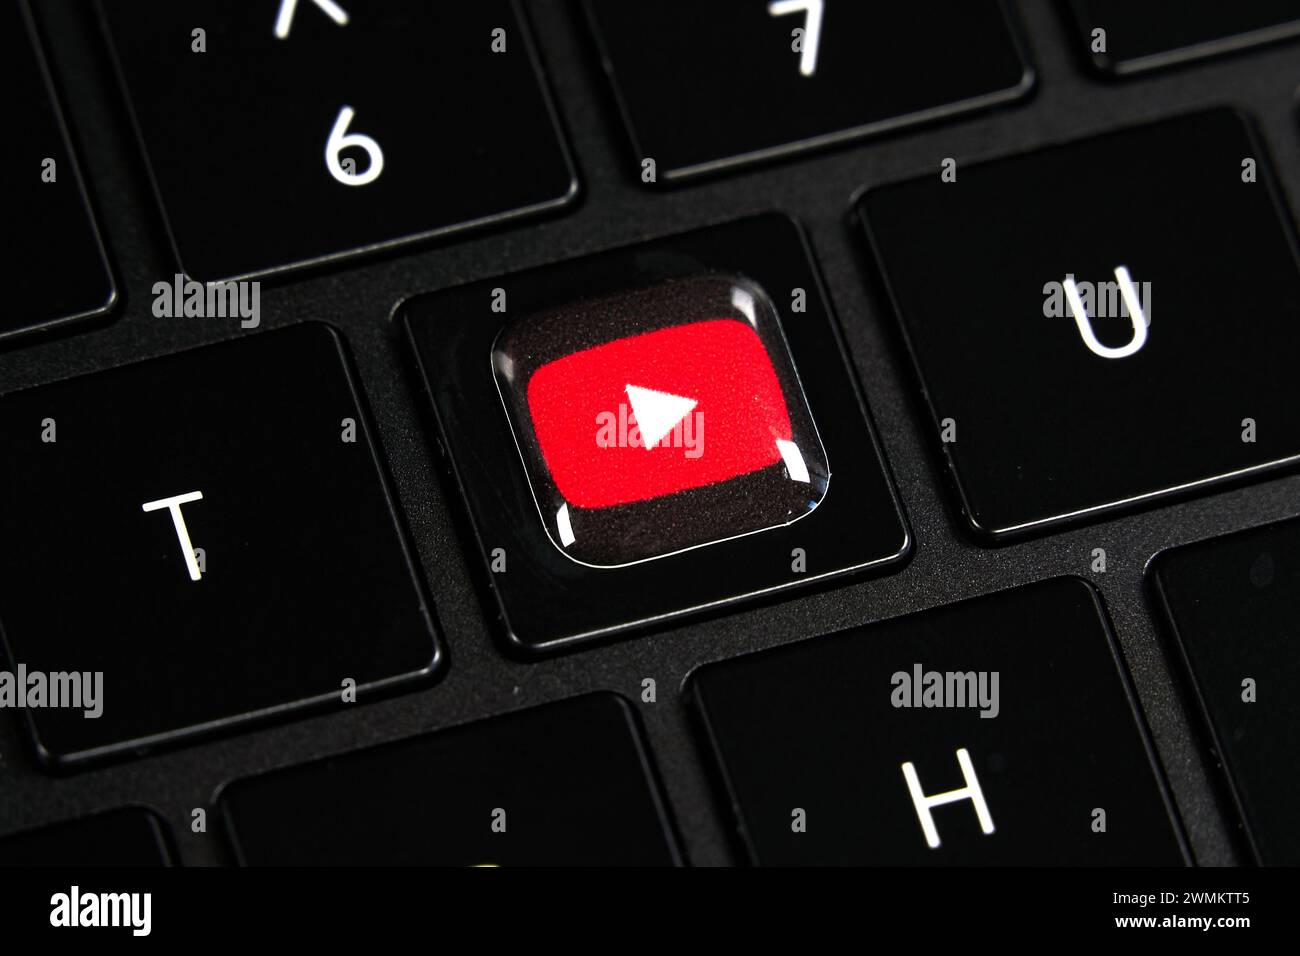 Dallas, TX USA - February 24, 2024: Youtube logo red button on Y key on laptop keyboard. Tech giant Google focuses on AI, search, software, and more, Stock Photo